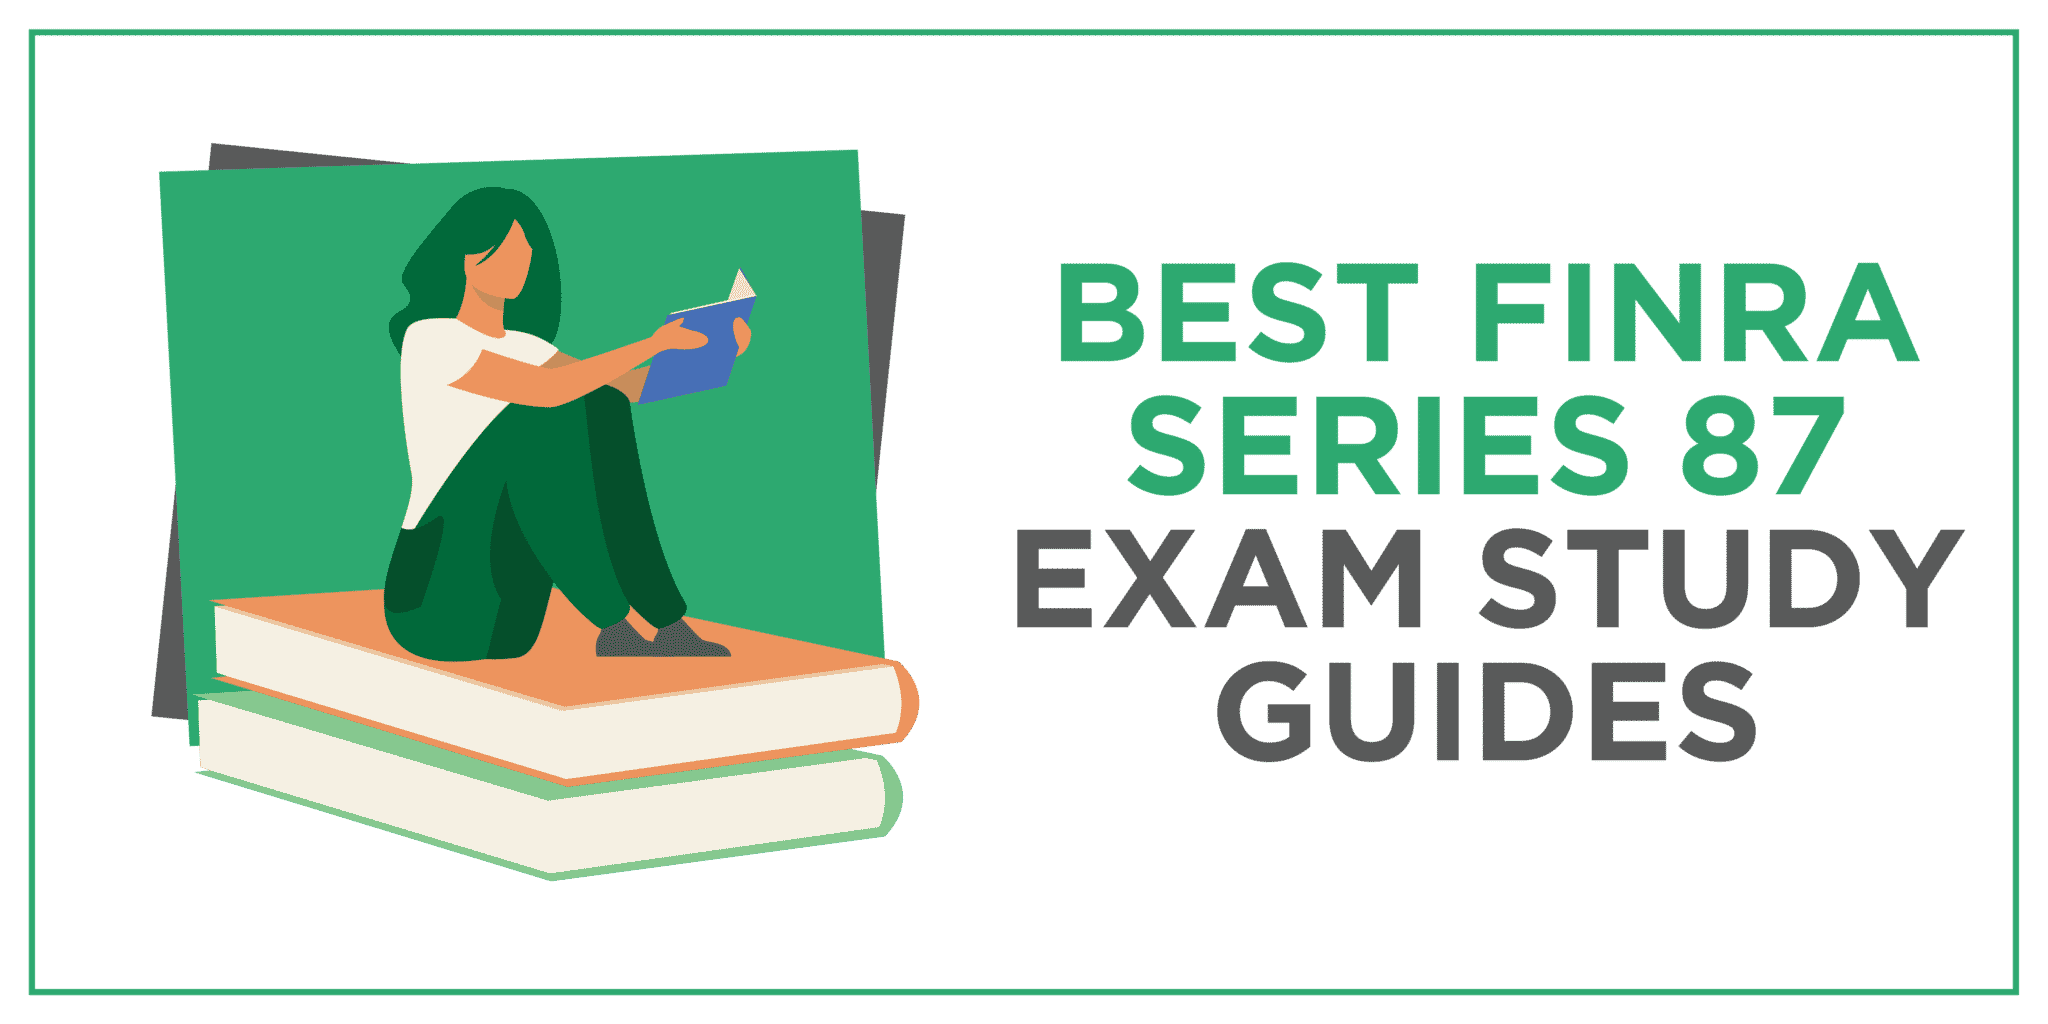 Best FINRA Series 87 Exam Study Guides